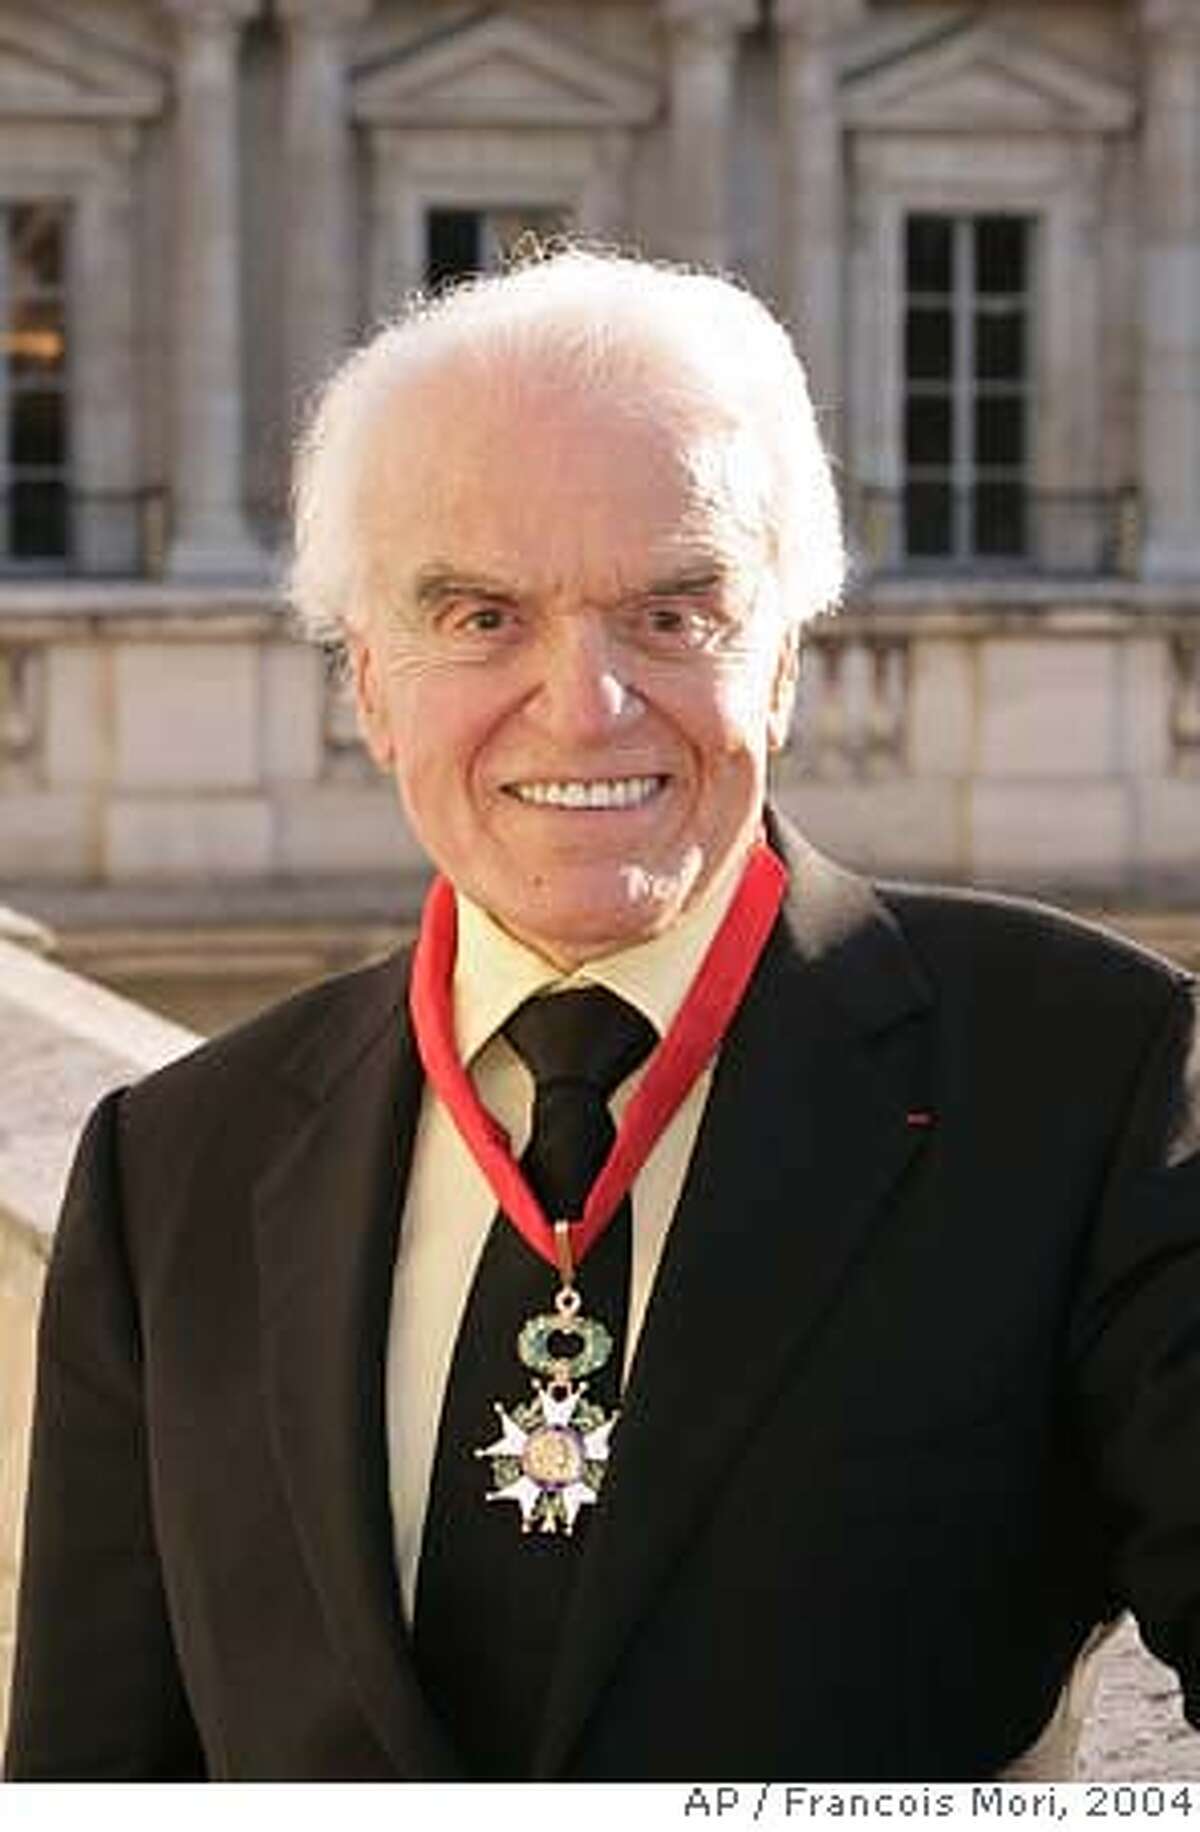 ** FILE ** Former Motion Pictures Association of America (MPAA) president Jack Valenti poses wearing his new insignia outside the French Culture ministry after an awarding ceremony, in this Sept. 6, 2004, file photo in Paris where he was awarded with the distinction of Officer of the Legion of Honor by French Culture Minister Renaud Donnedieu de Vabre. Valenti, the former White House aide and film industry lobbyist who instituted the modern movie ratings system and guided Hollywood from the censorship era to the digital age, died Thursday, April 26, 2007. He was 85. (AP Photo/Francois Mori, file) Ran on: 04-27-2007 Ran on: 04-27-2007 2004 FILE PHOTO